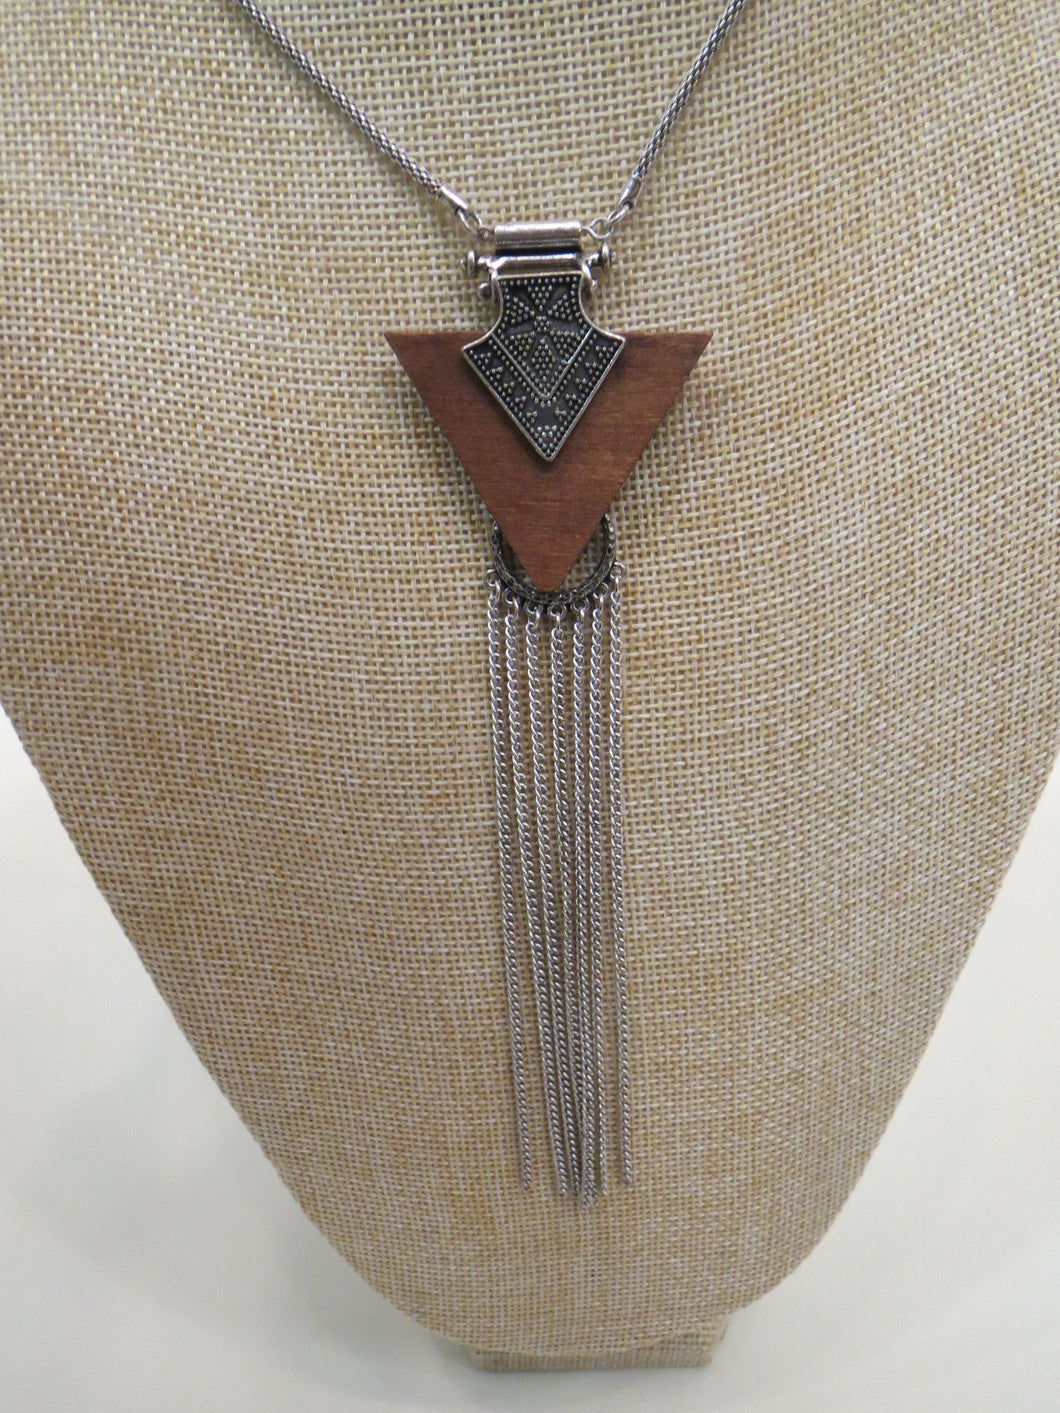 Wood & Tassel Pendant on Long Silver Chain Necklace | All Dec'd Out